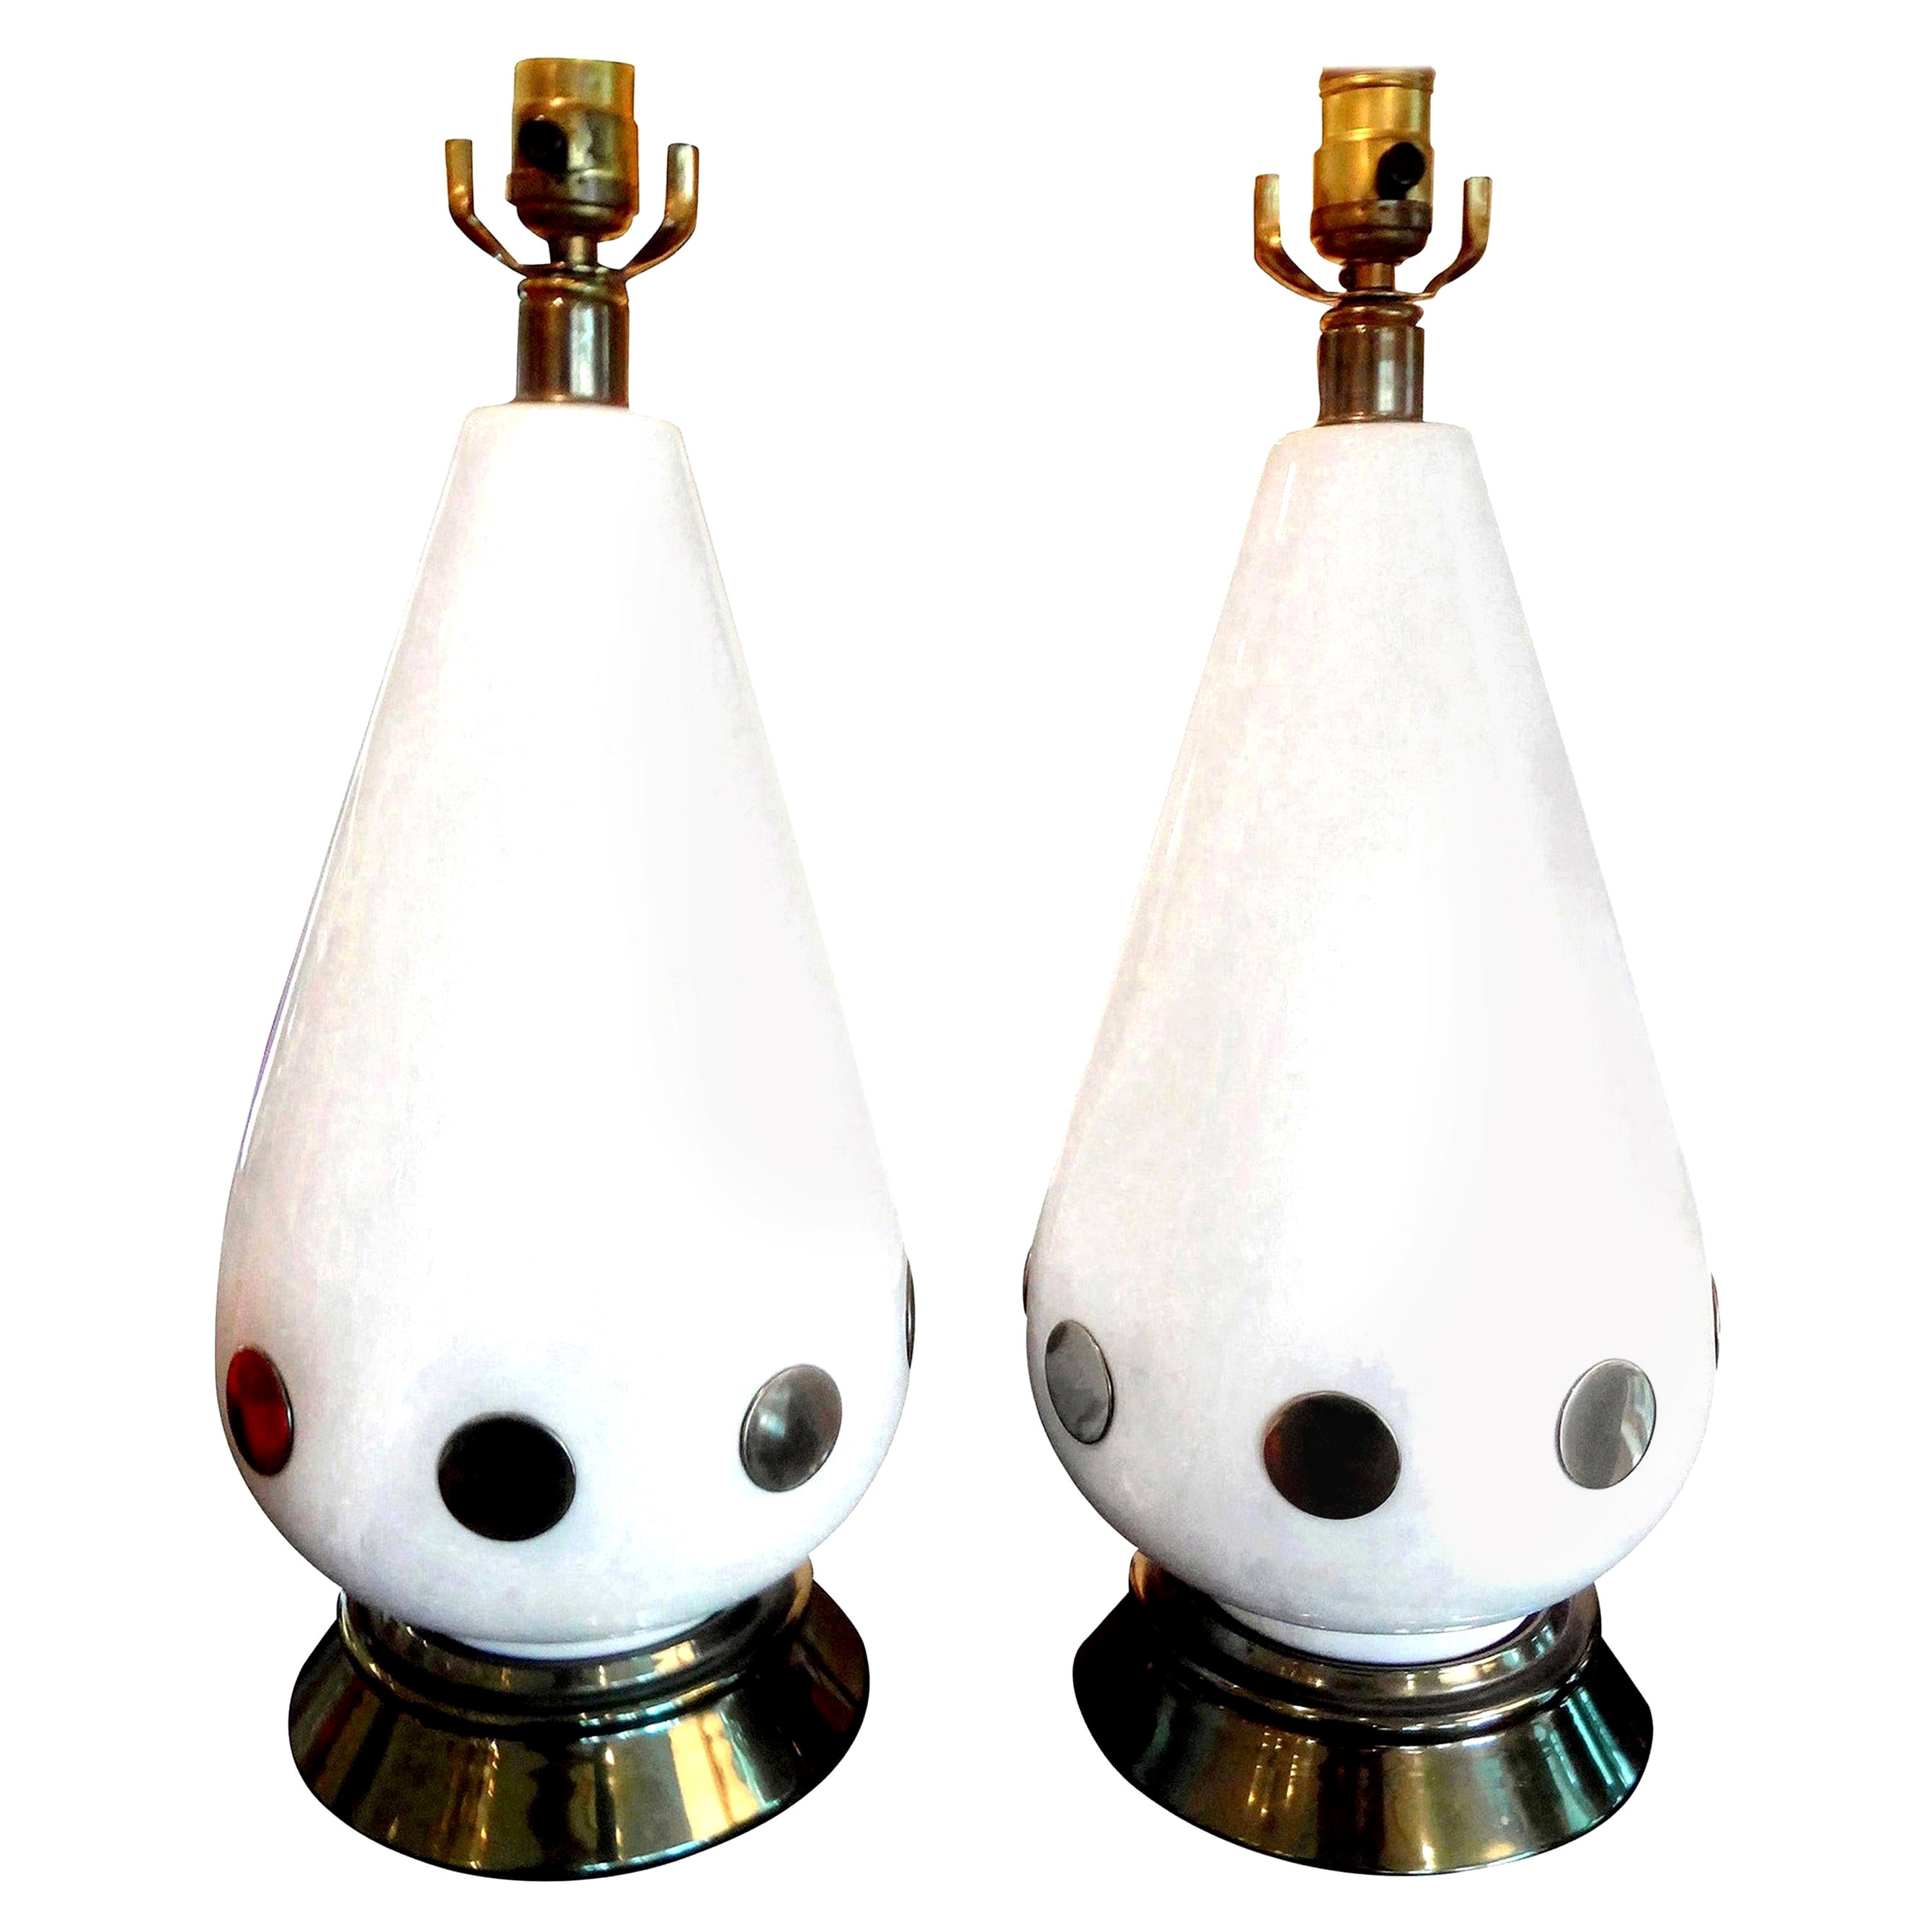 Pair of Italian Mid-Century Modern White Porcelain and Brass Lamps